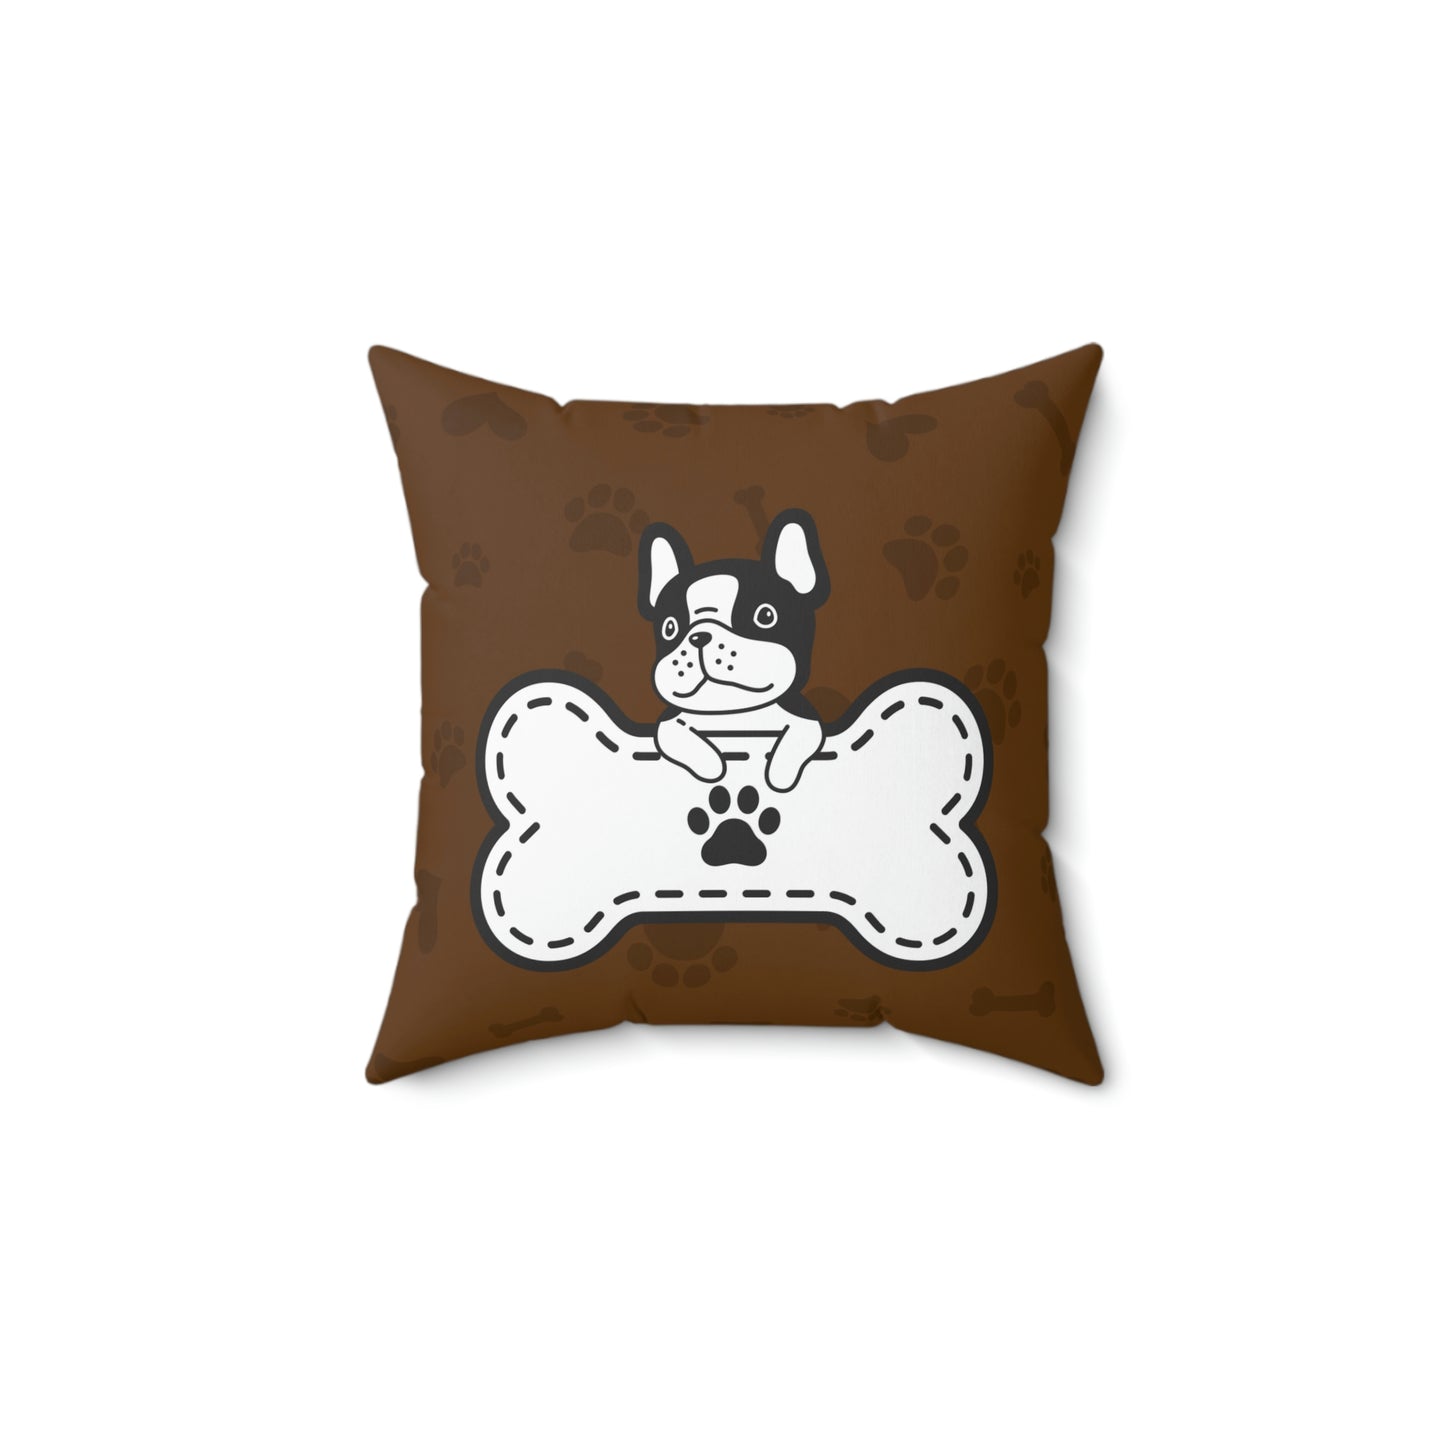 French Bulldog with Bone Design Spun Polyester Square Indoor Pillow